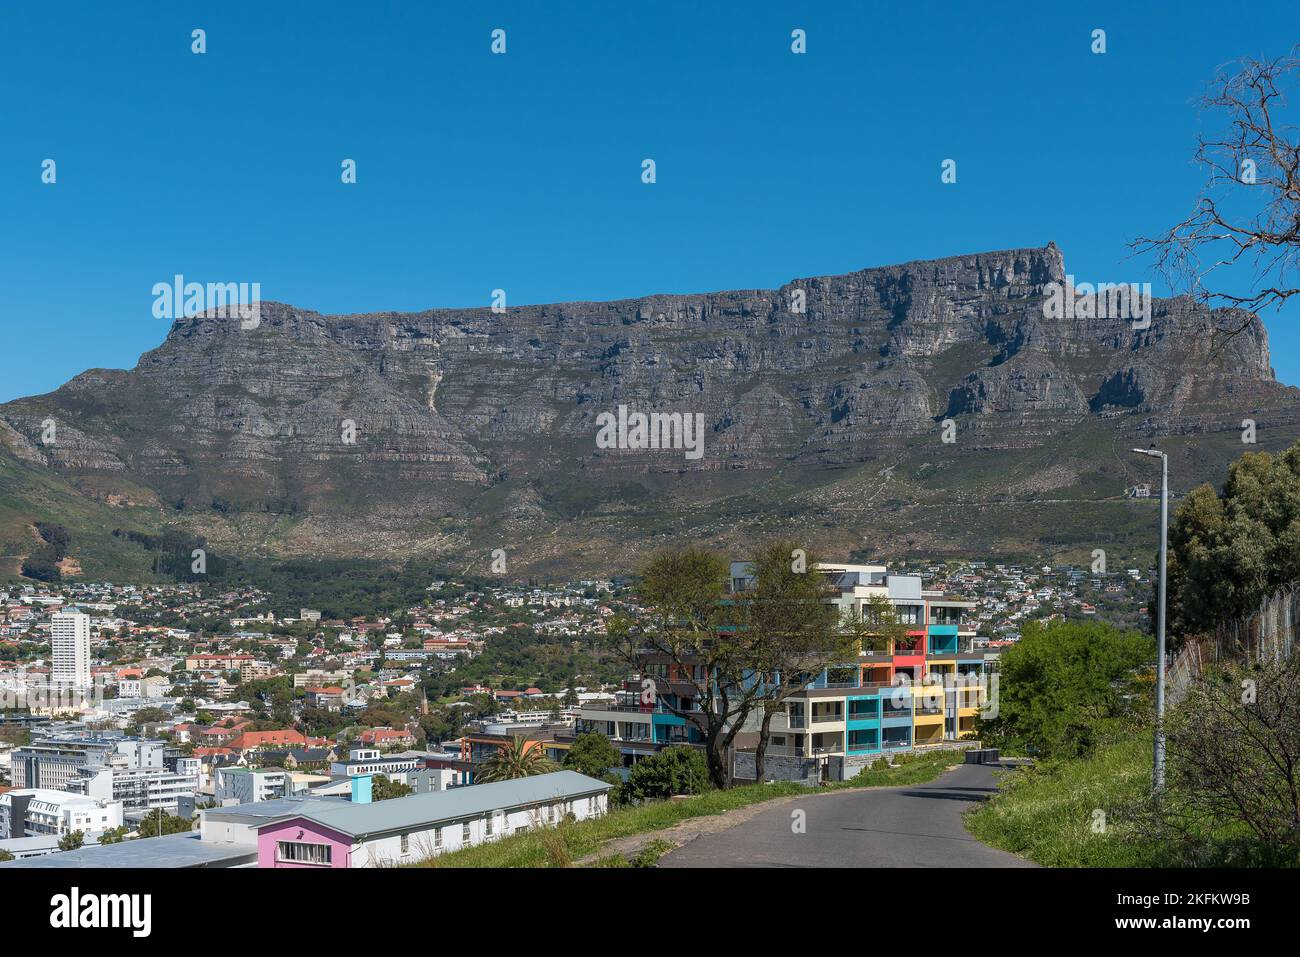 Cape Town, South Africa - Sep 14, 2022: Table Mountain, part of Cape Town and part of the colorful Bo-Kaap as seen from Military Road Stock Photo